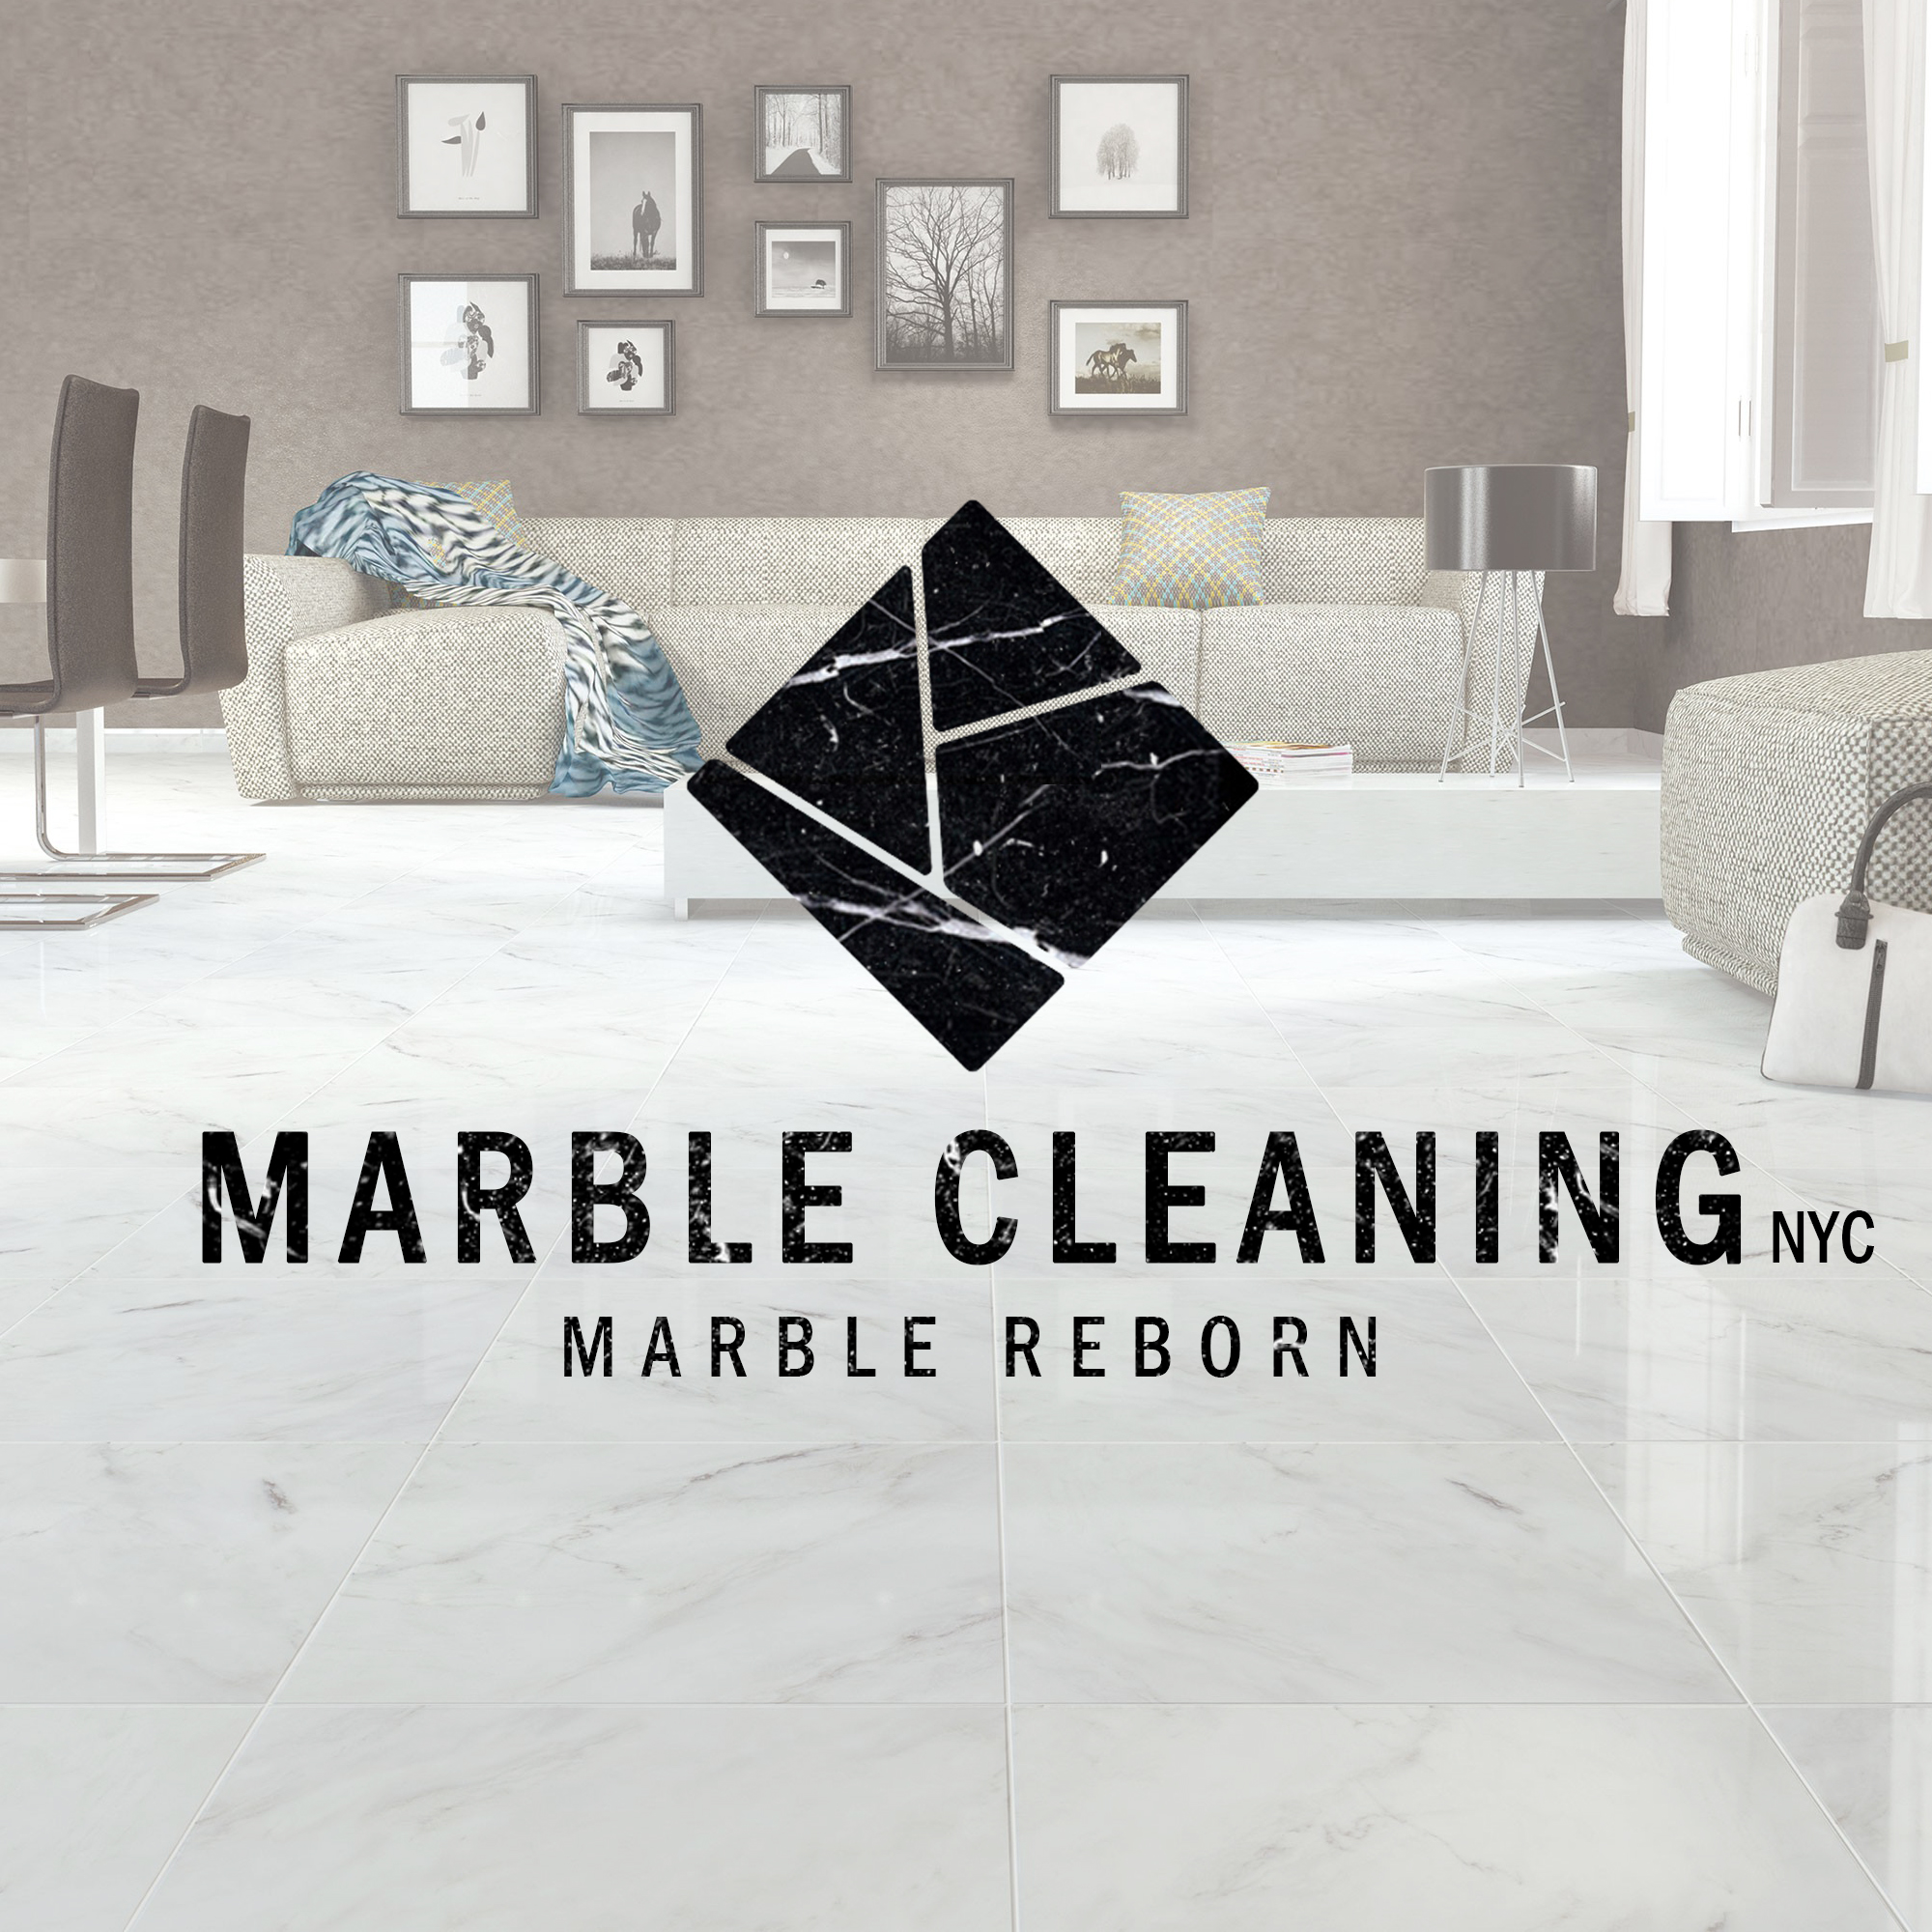 Marble Cleaning NYC, Inc. Logo